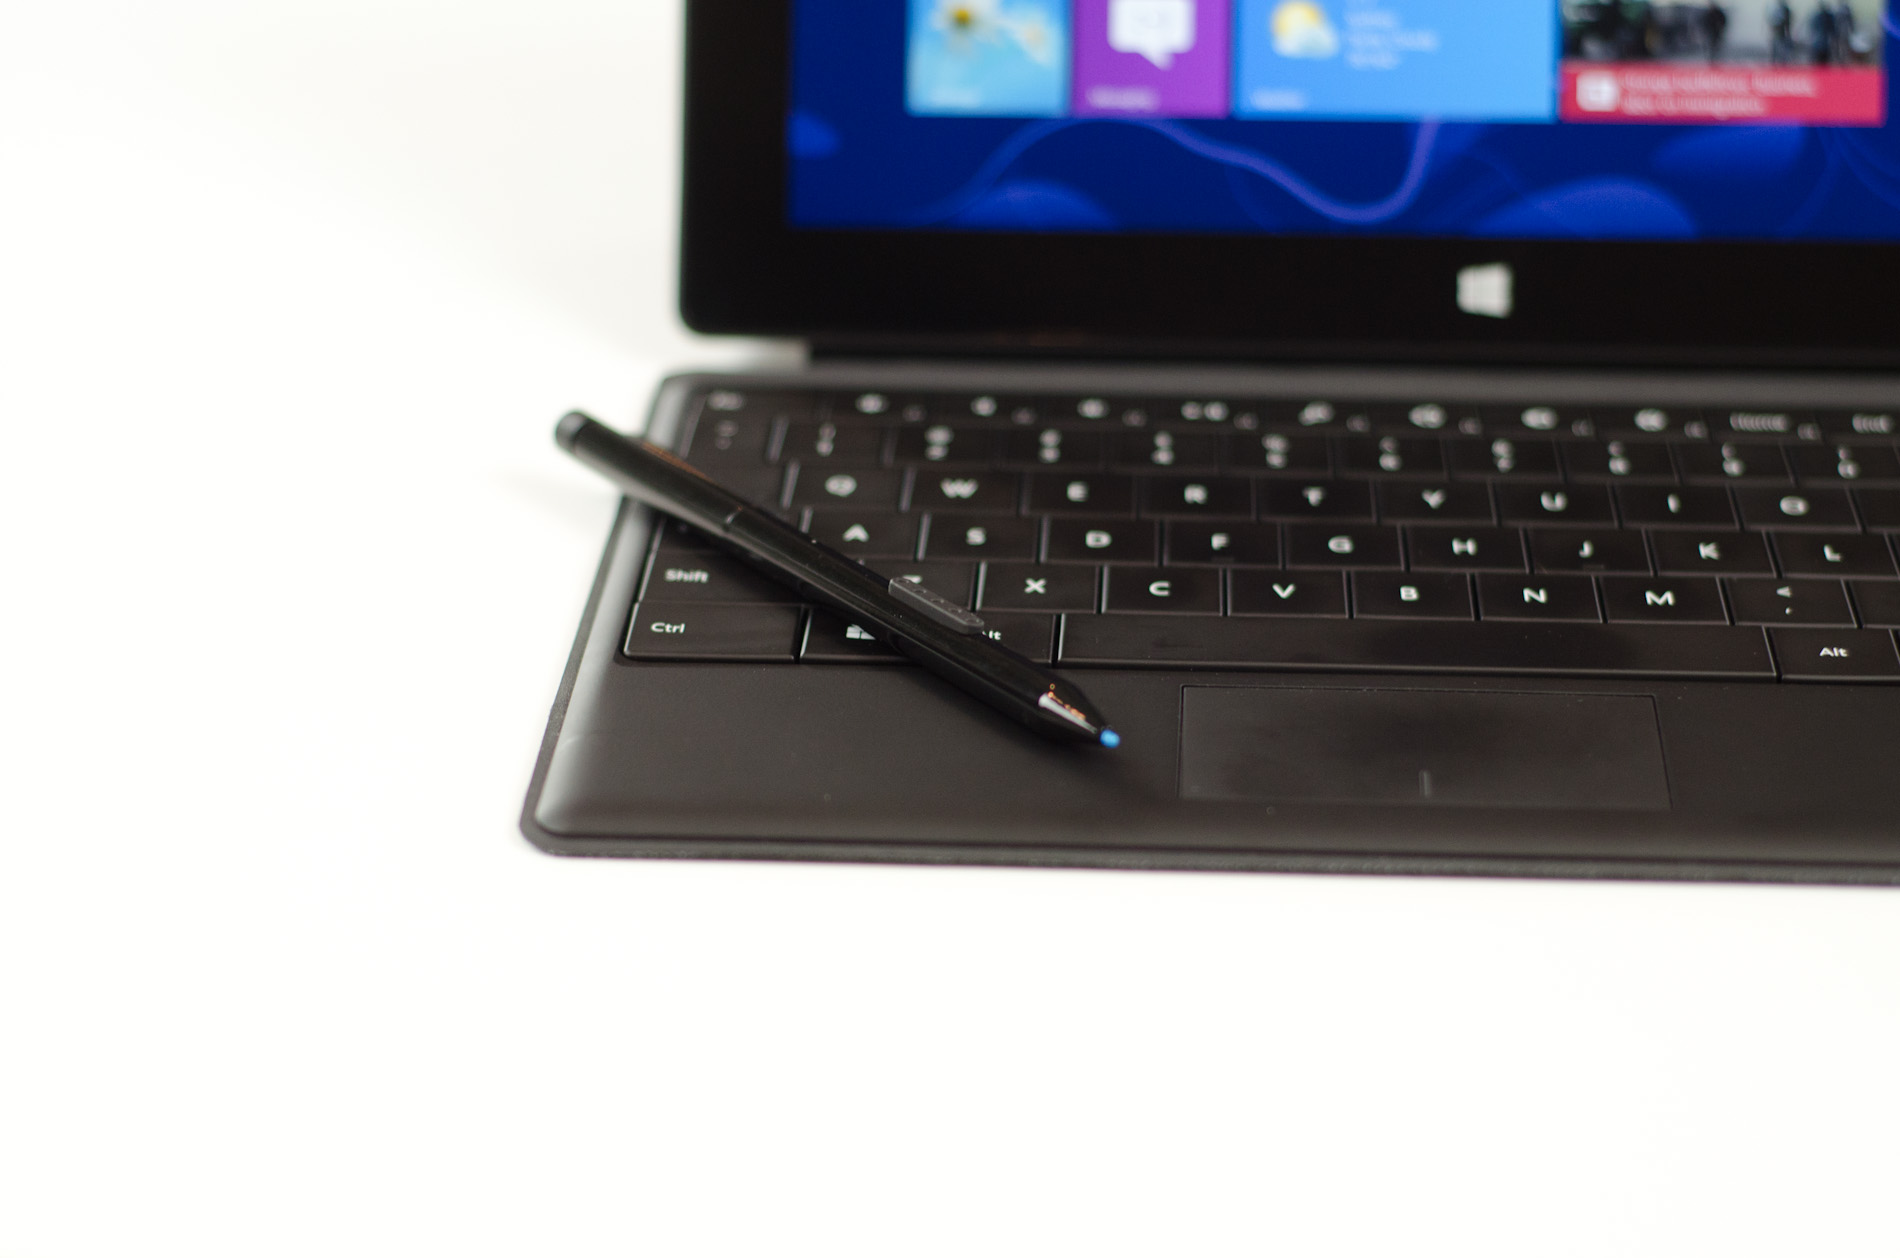 Microsoft Surface Tablet Pro Review